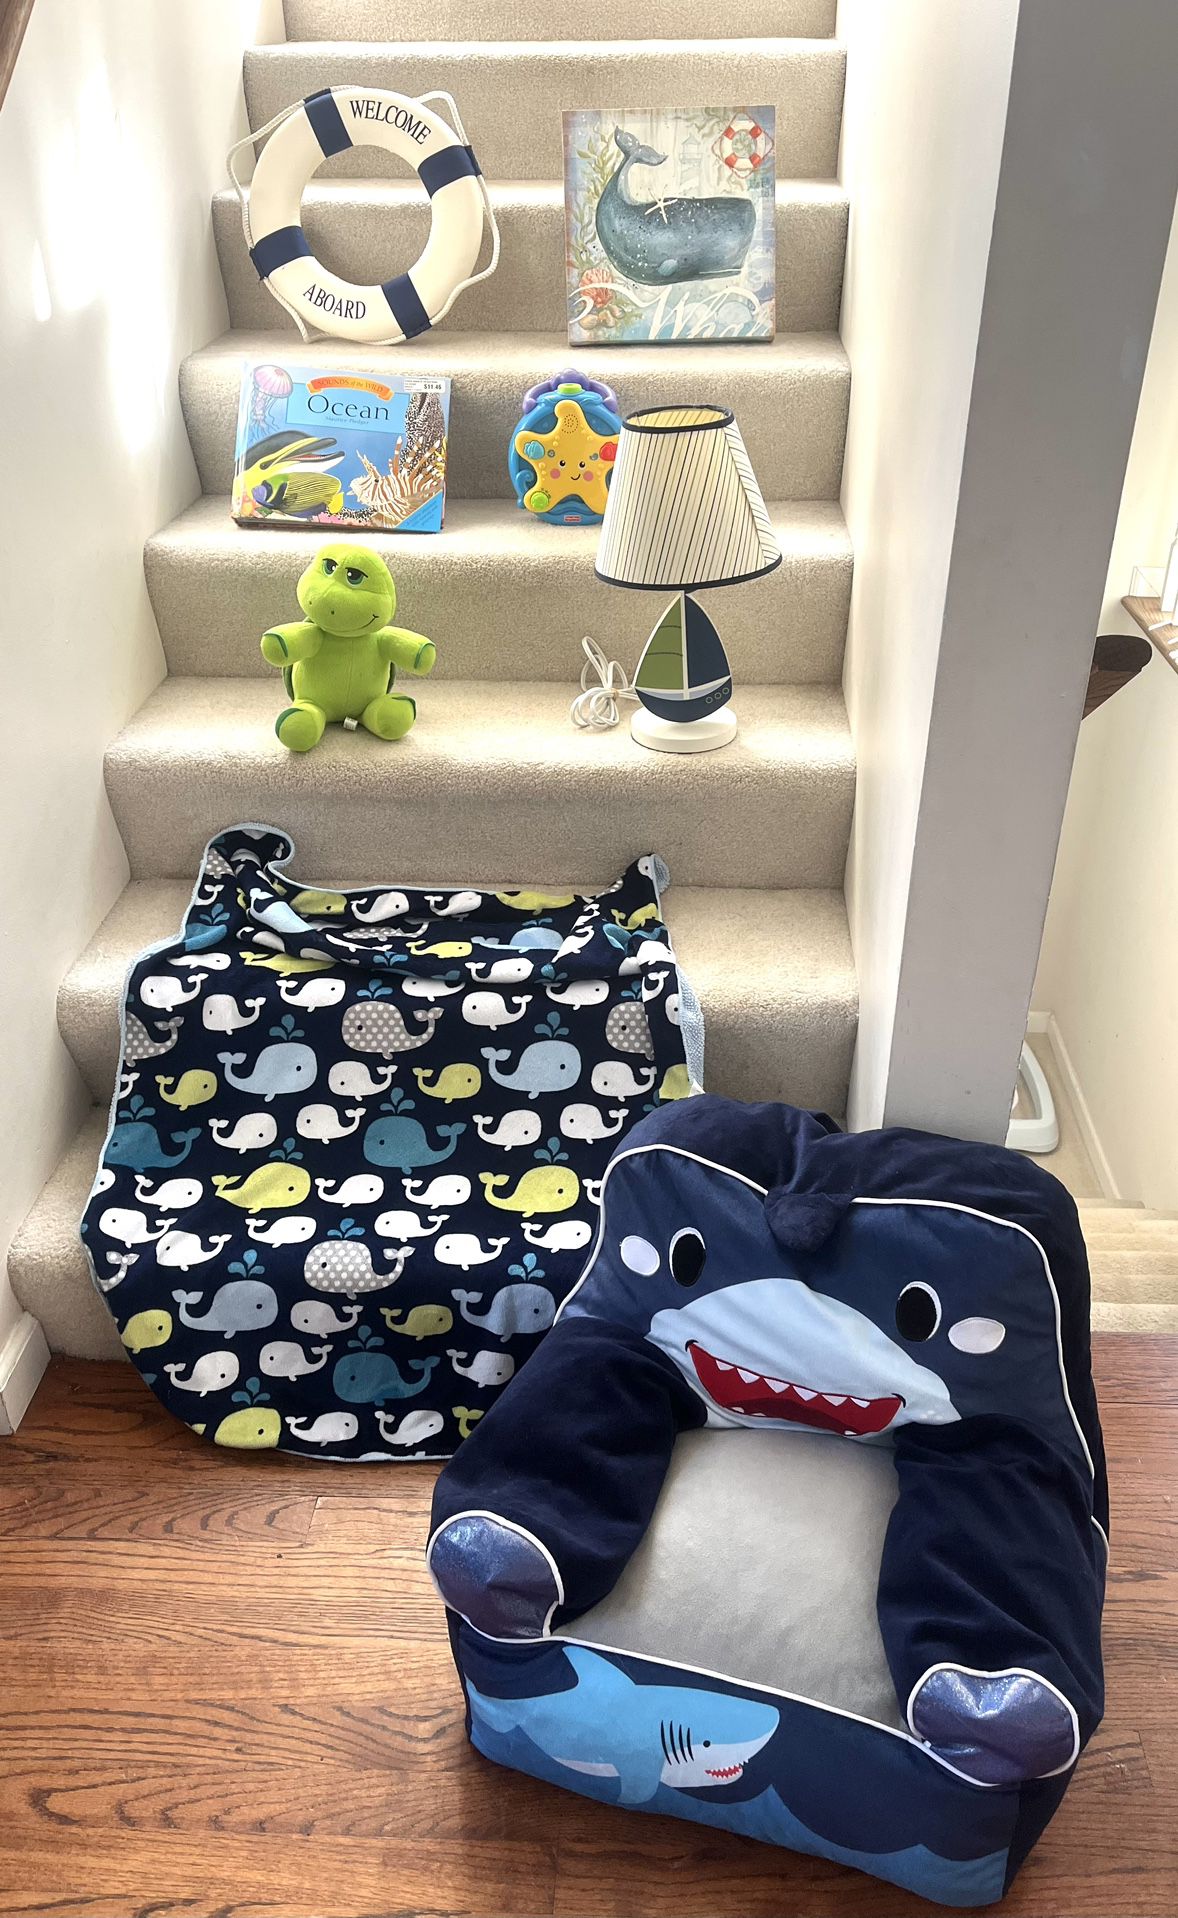 Adorable Lot Of Baby Kids Ocean Theme Room Decor. Beanbag Chair, Lamp, Fisher Price Ocean Musical  Soother, Soft Blanket, Book & More! ($55 For All)